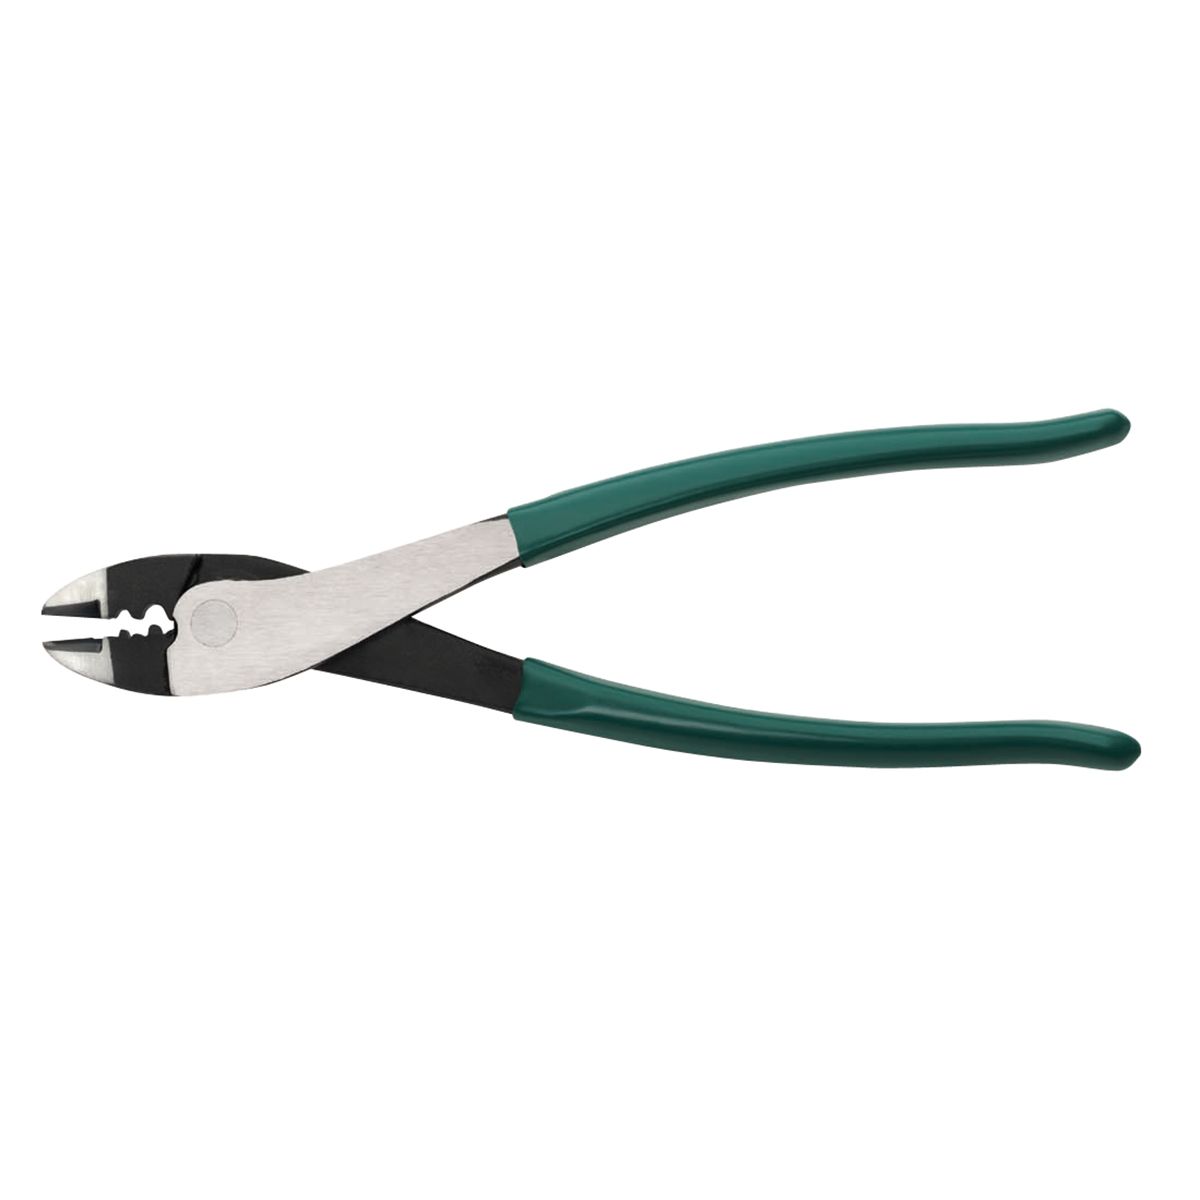 z-nla Insulated / Non-Insulated Terminal Crimping Pliers - 9 In